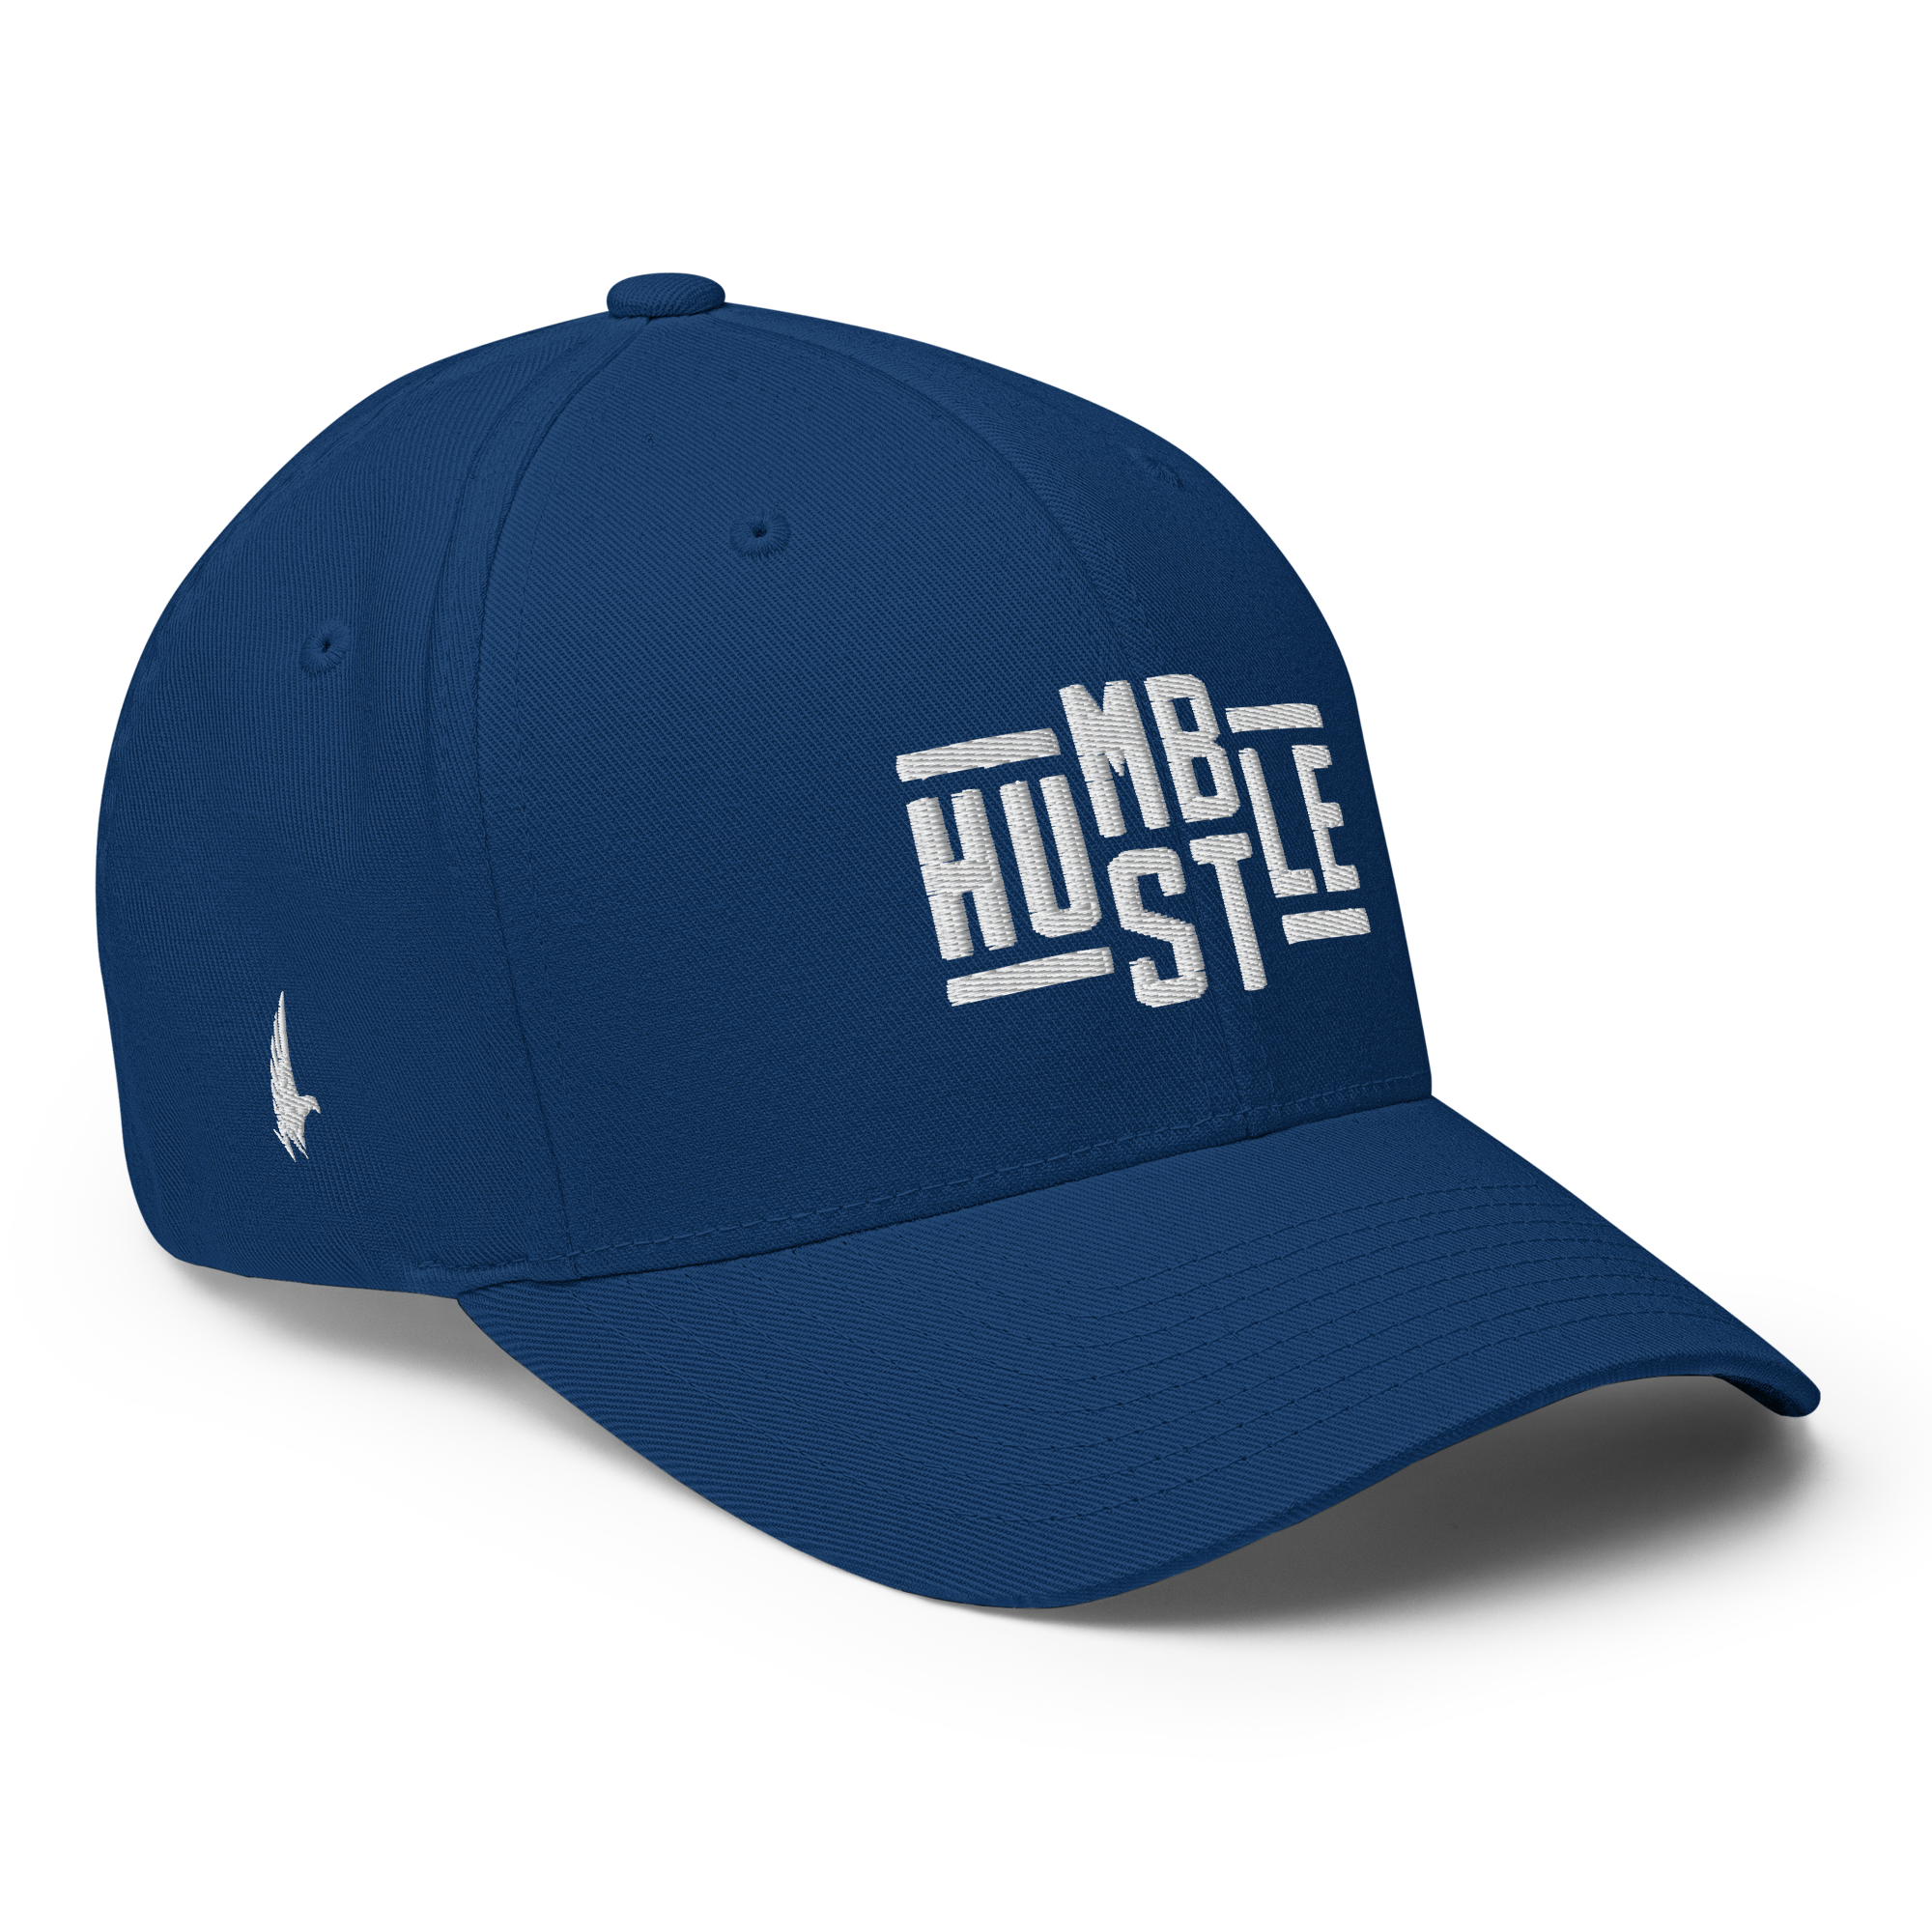 Loyalty Vibes Hustle Fitted Hat Blue / White Fitted - Loyalty Vibes